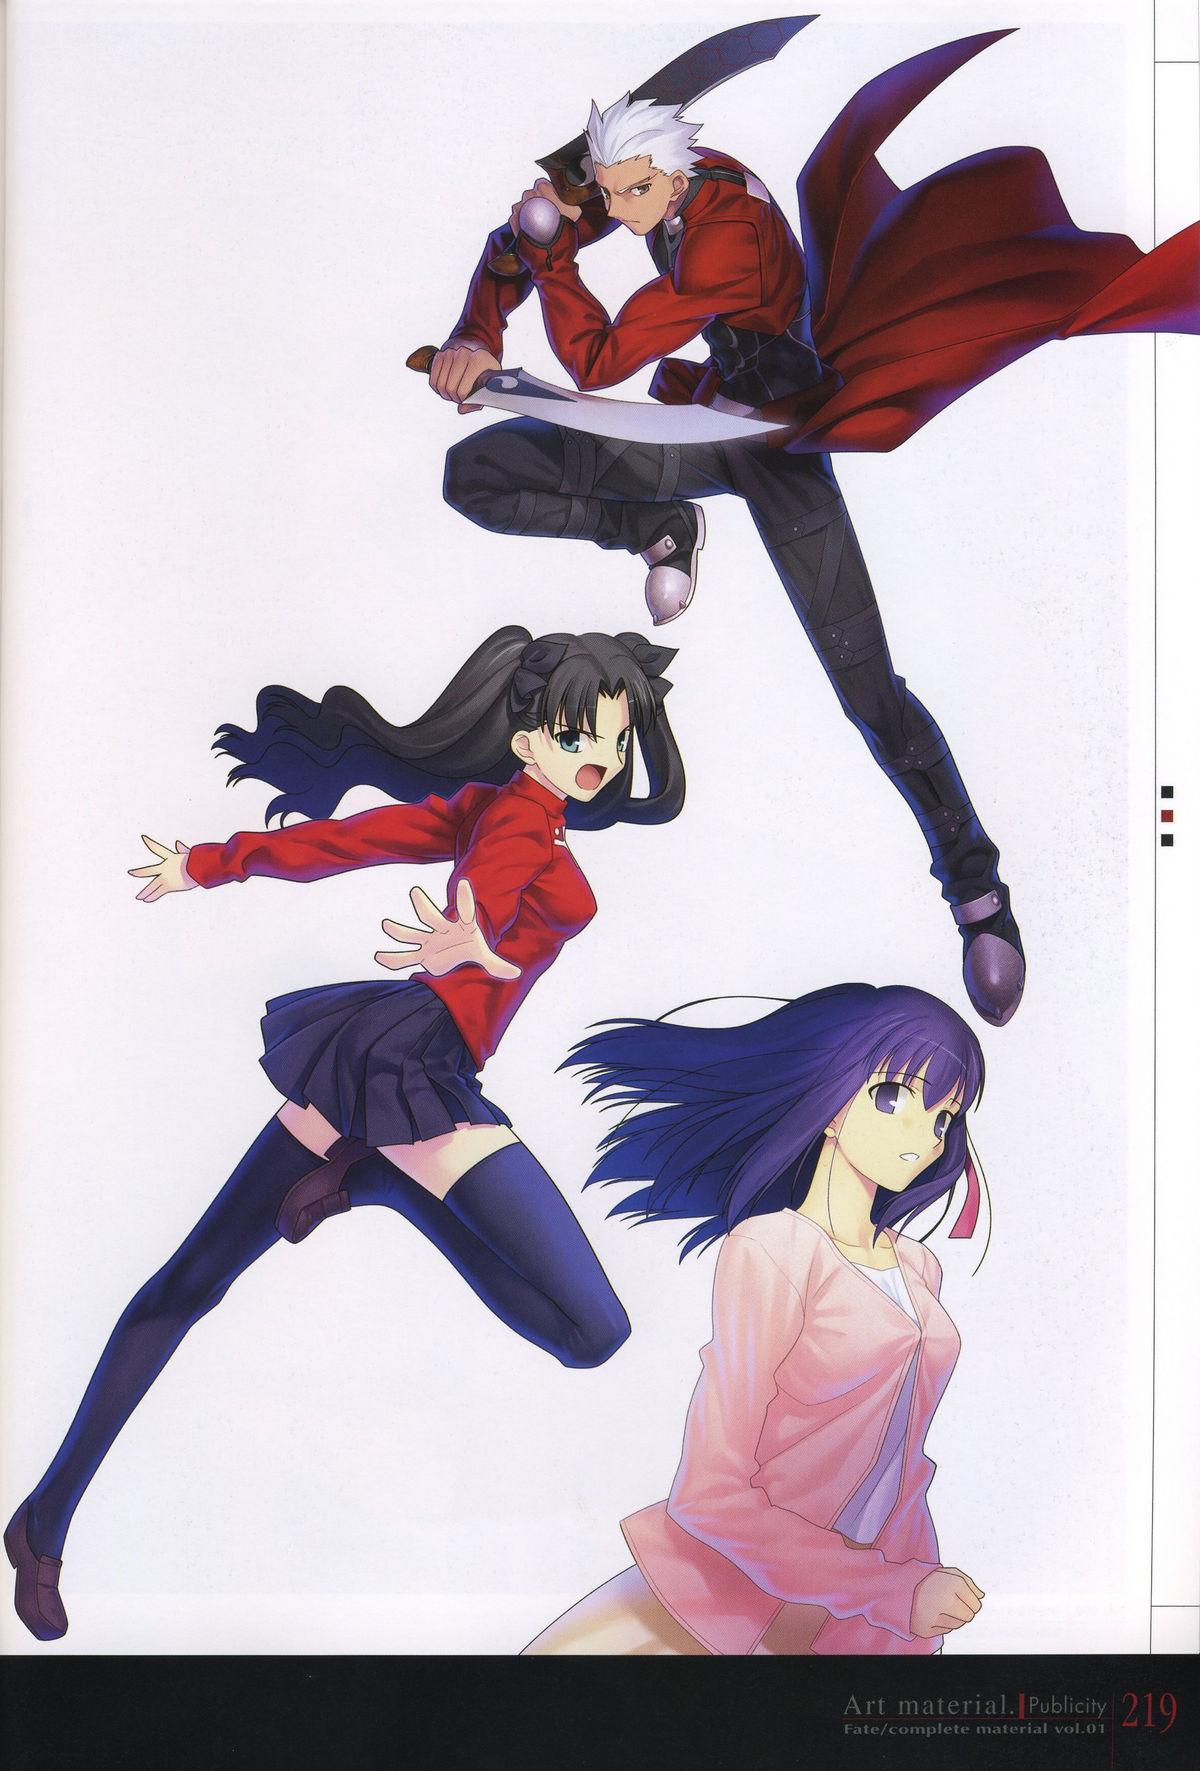 Fate/complete material I - Art material. 223